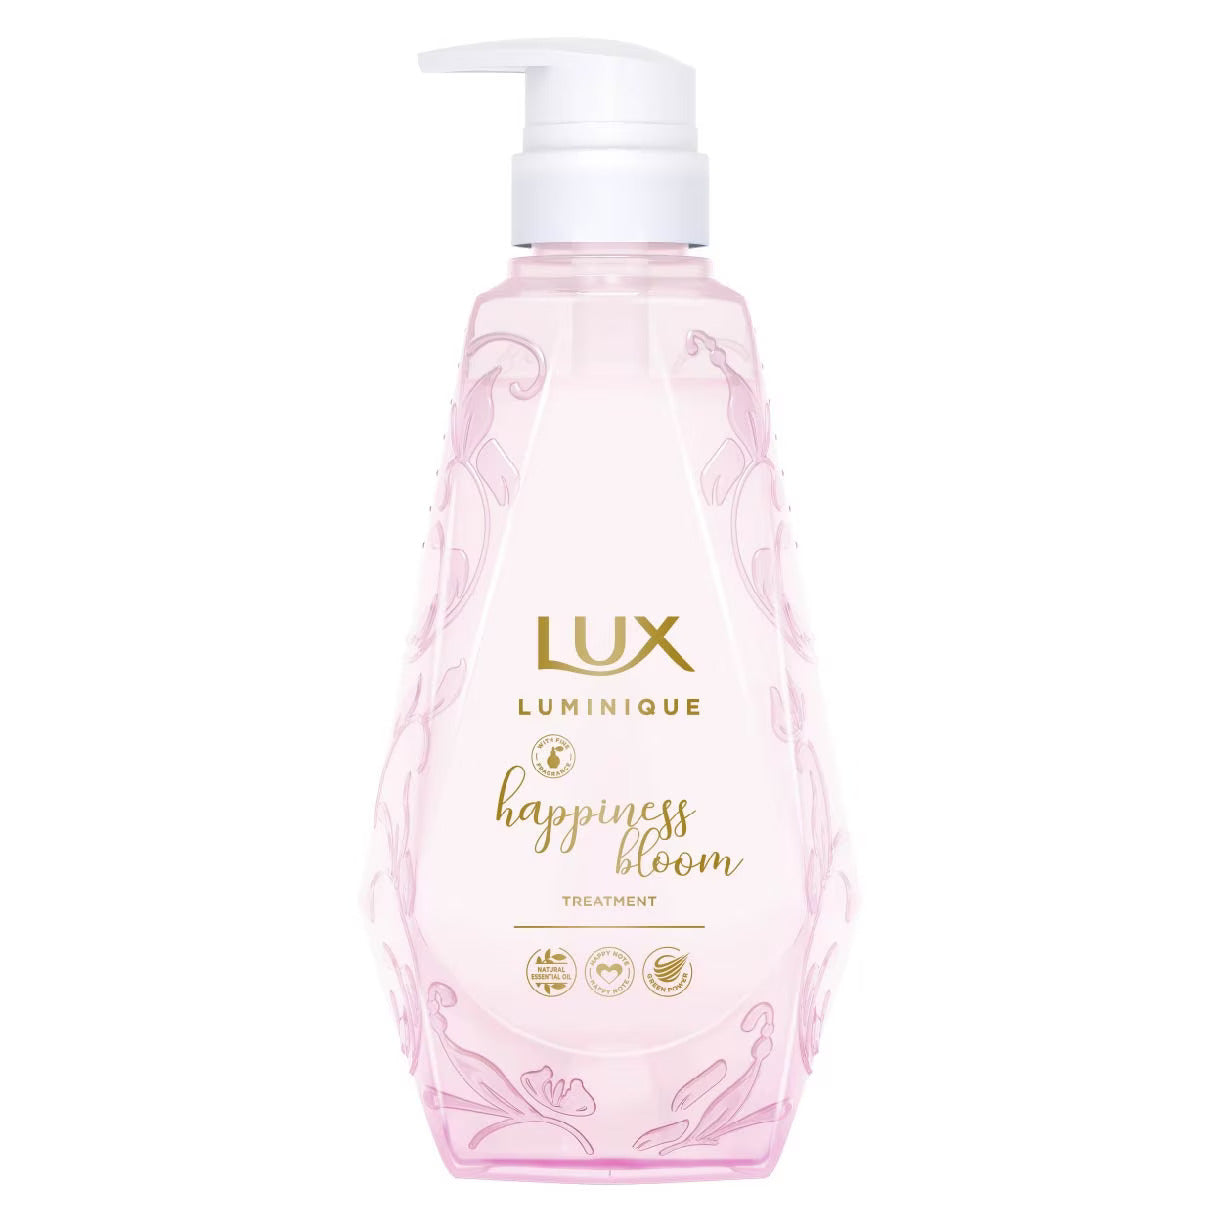 Lux Luminique Shampoo OR Treatment 450ml (Damage Repair / Botanical Pure / Happiness Bloom)